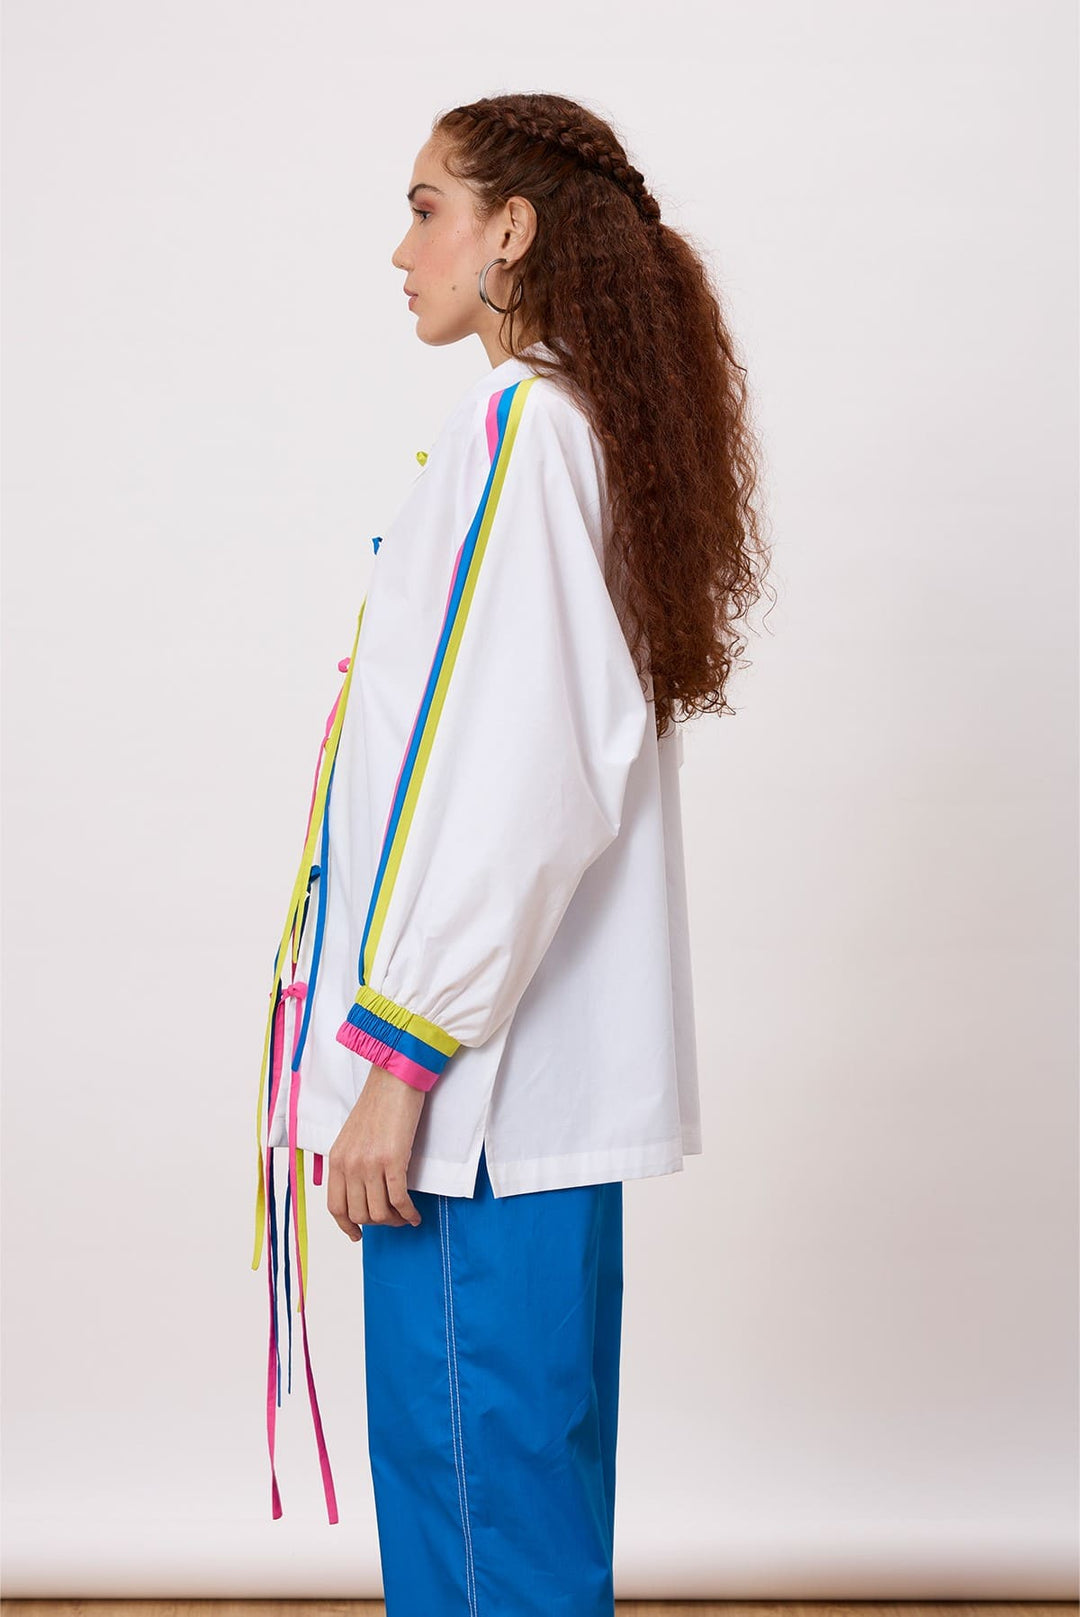 Sloane Shirt Sporty and cool - this tie placket shirt with colour block trim